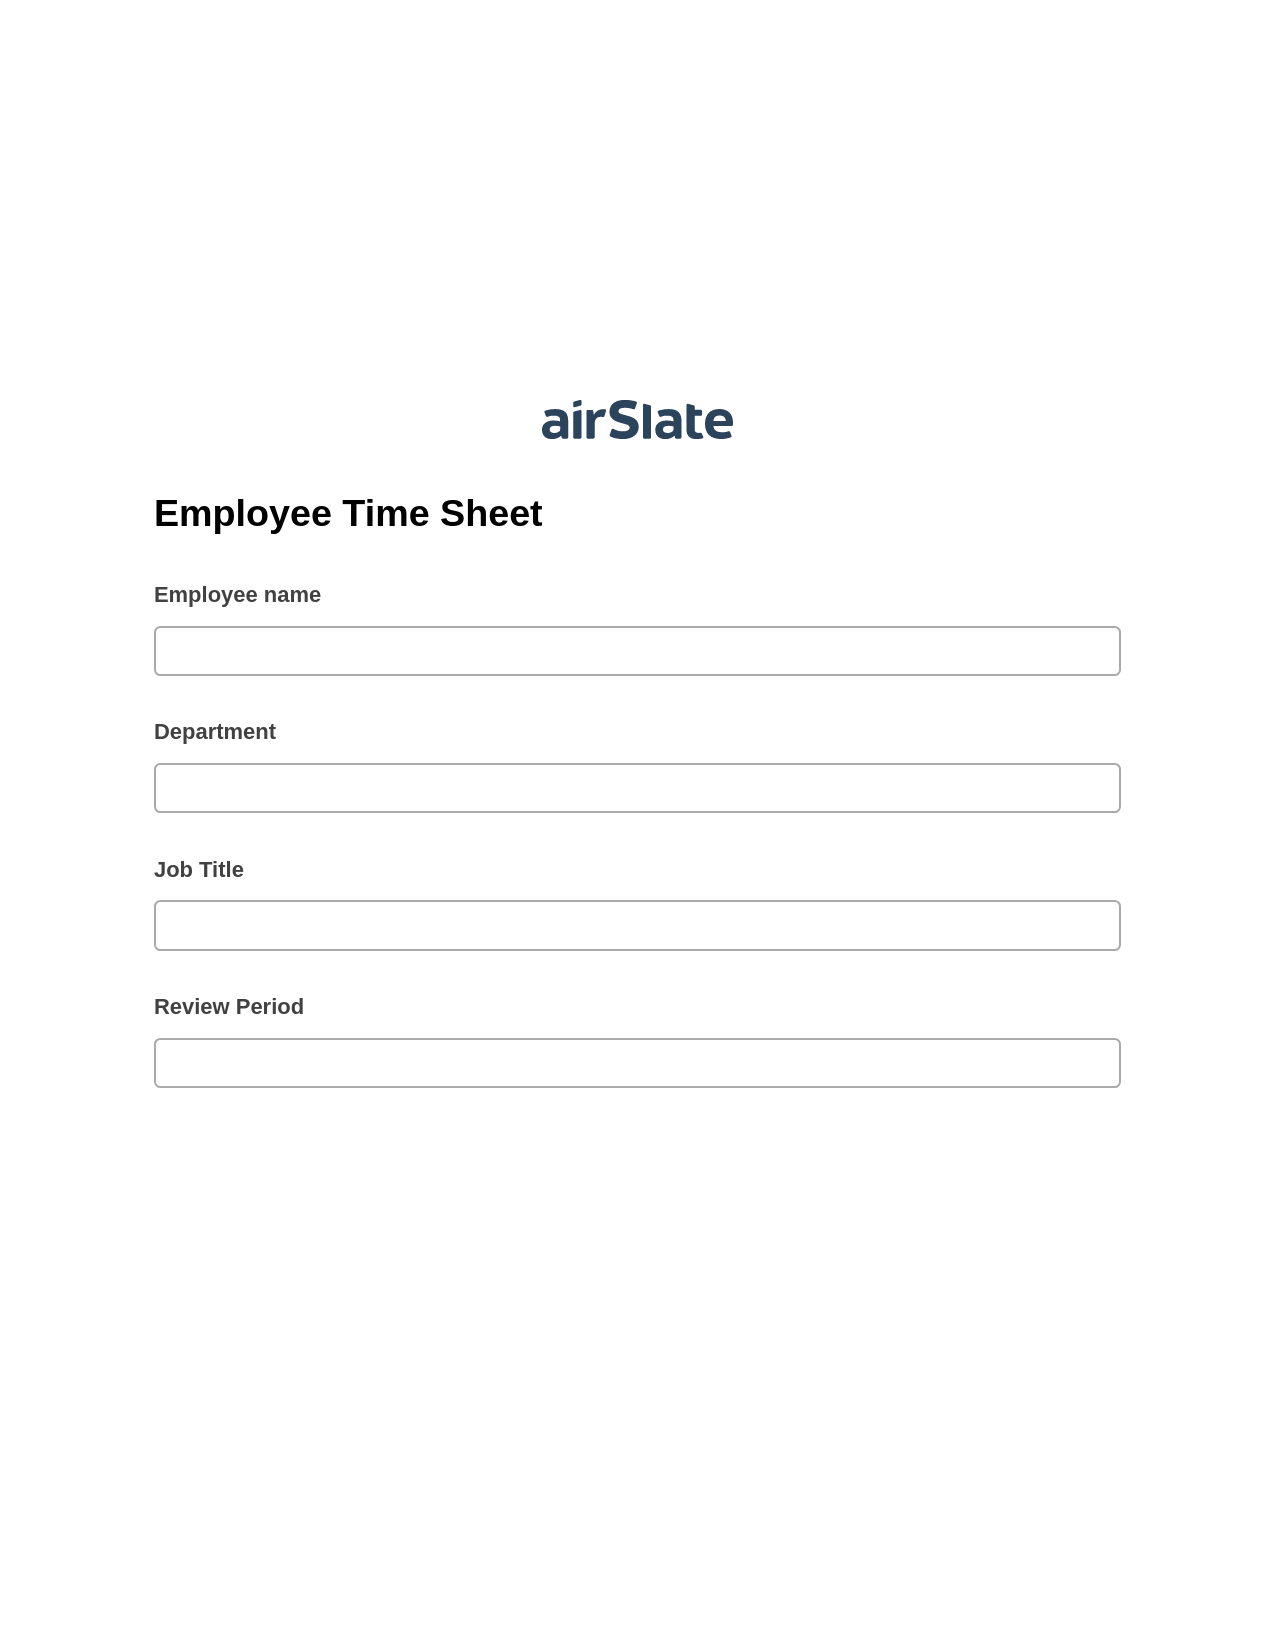 Employee Time Sheet Pre-fill Dropdowns from CSV file Bot, Invoke Salesforce Process Bot, Export to Excel 365 Bot